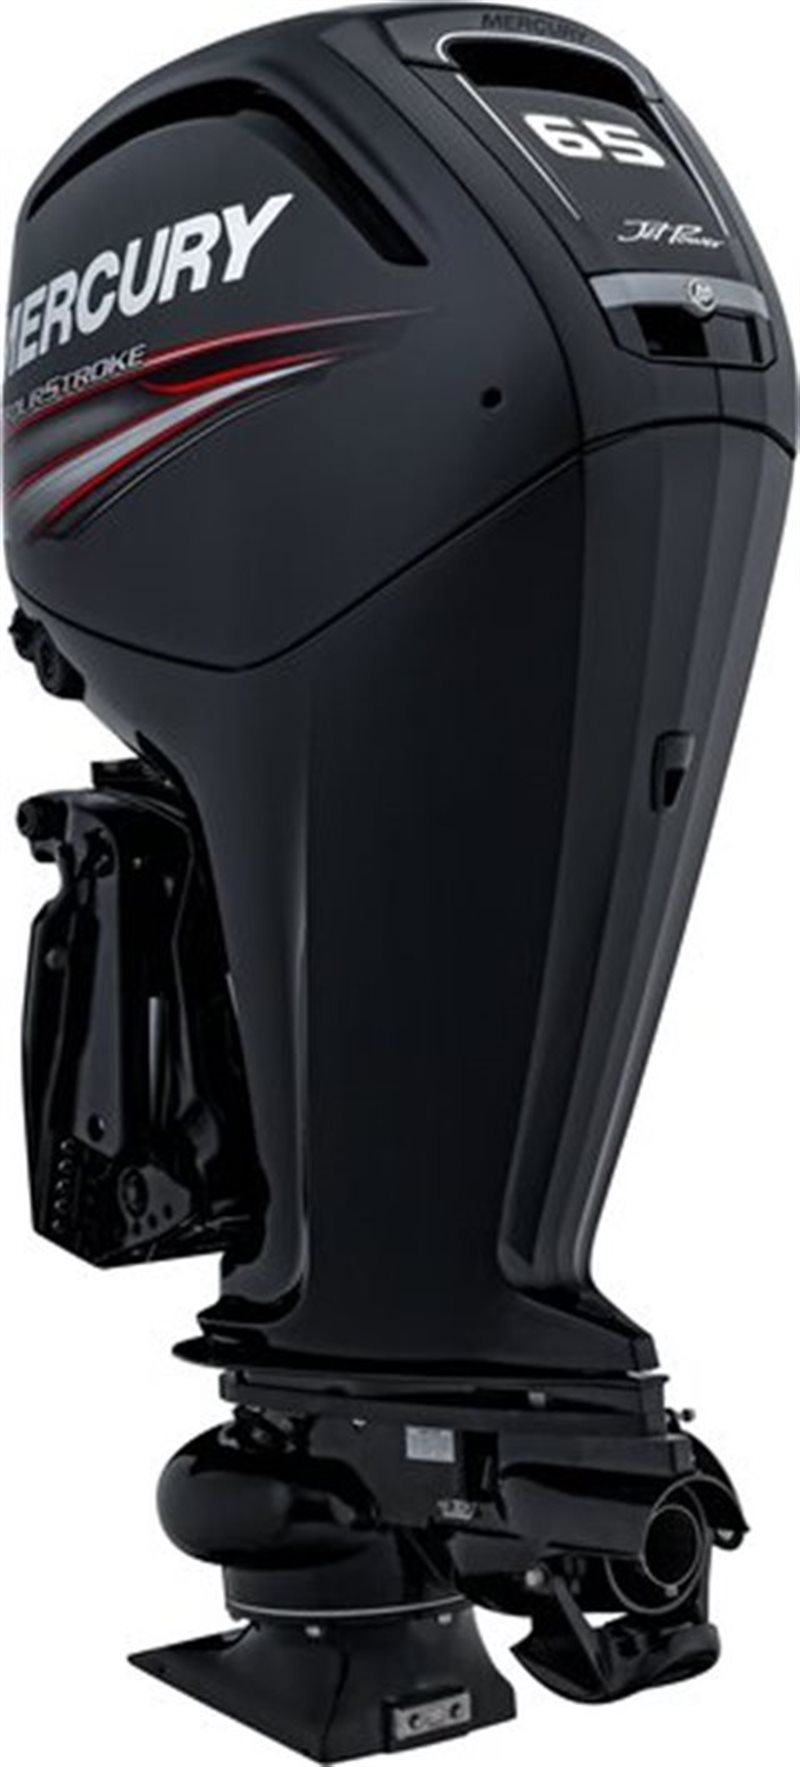 2020 Mercury Outboard FourStroke Jet Outboards 25-80 hp 65 hp Jet FourStroke at Fort Fremont Marine